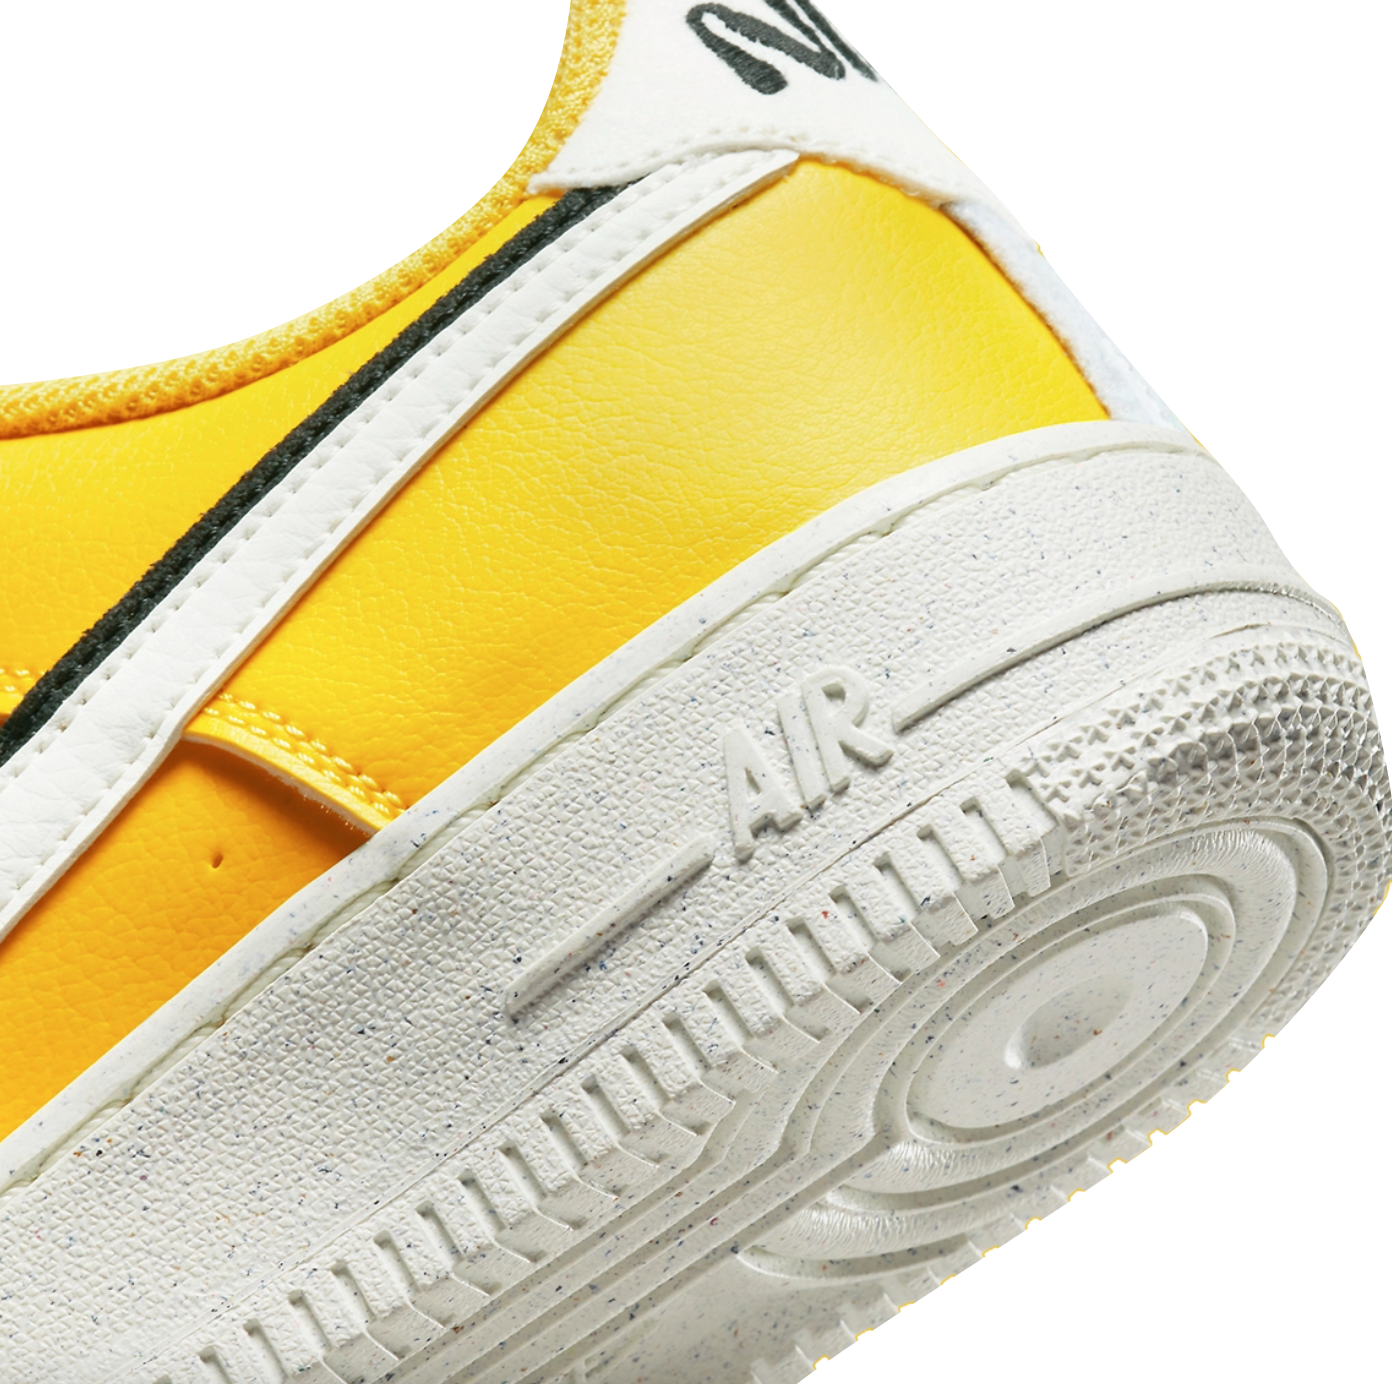 Nike Air Force 1 Low 40th Anniversary 'Yellow' (GS) - DQ0359-700 - Restocks